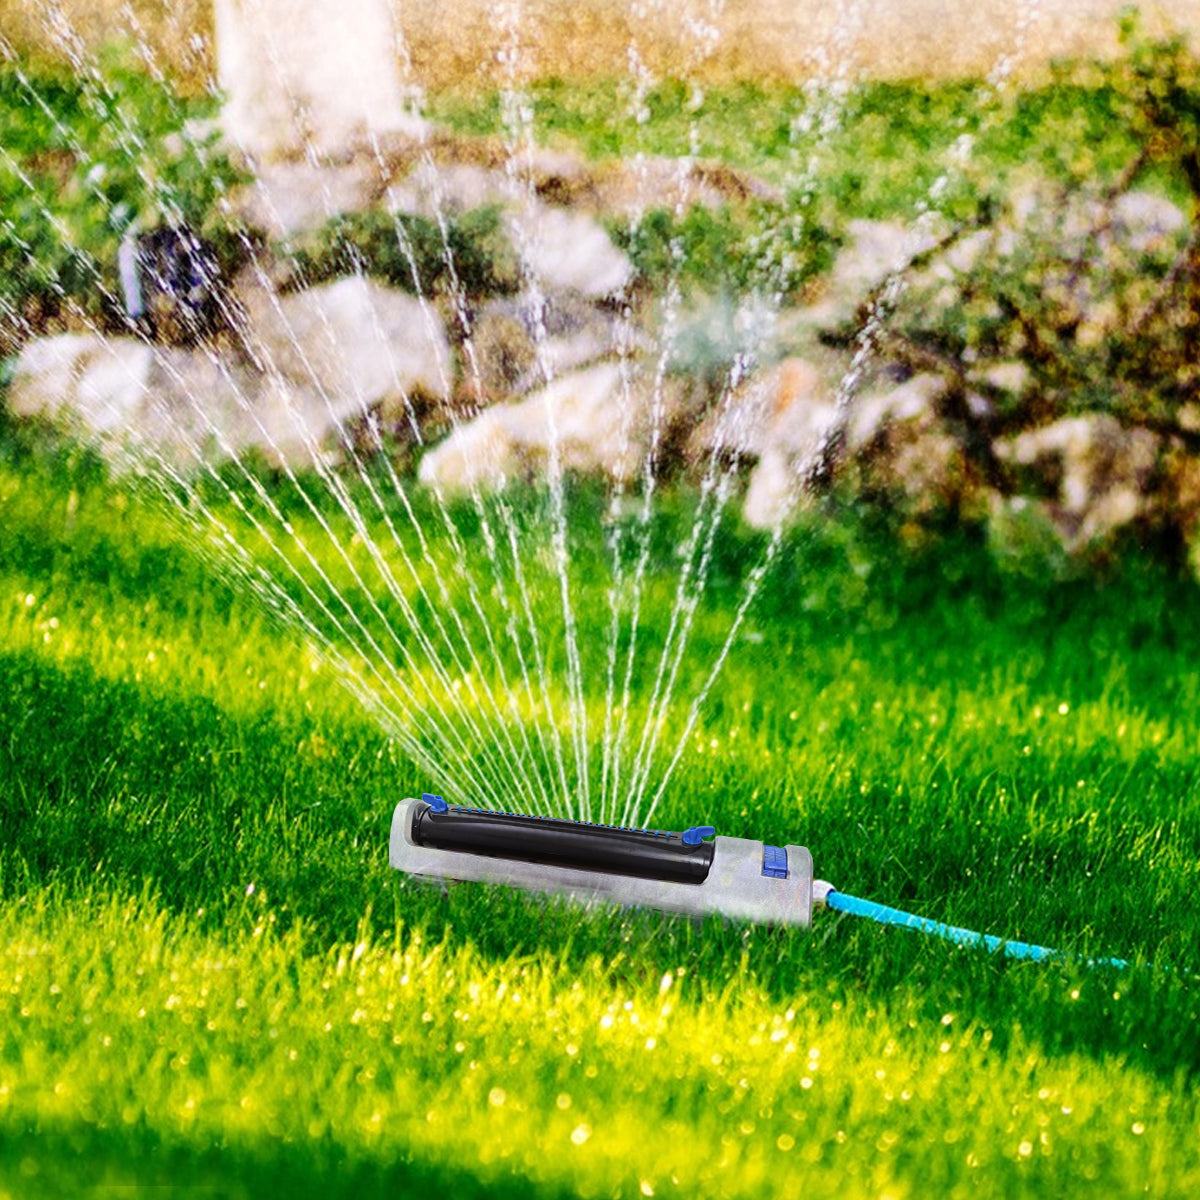 Yardeen Water Oscillating Sprinkler for Lawn, Yard Heavy Duty Connect Starter Set with 20 Hole Brass Nozzles Adjustable Metal Steel Garden Sprinkler Lawn Irrigation System